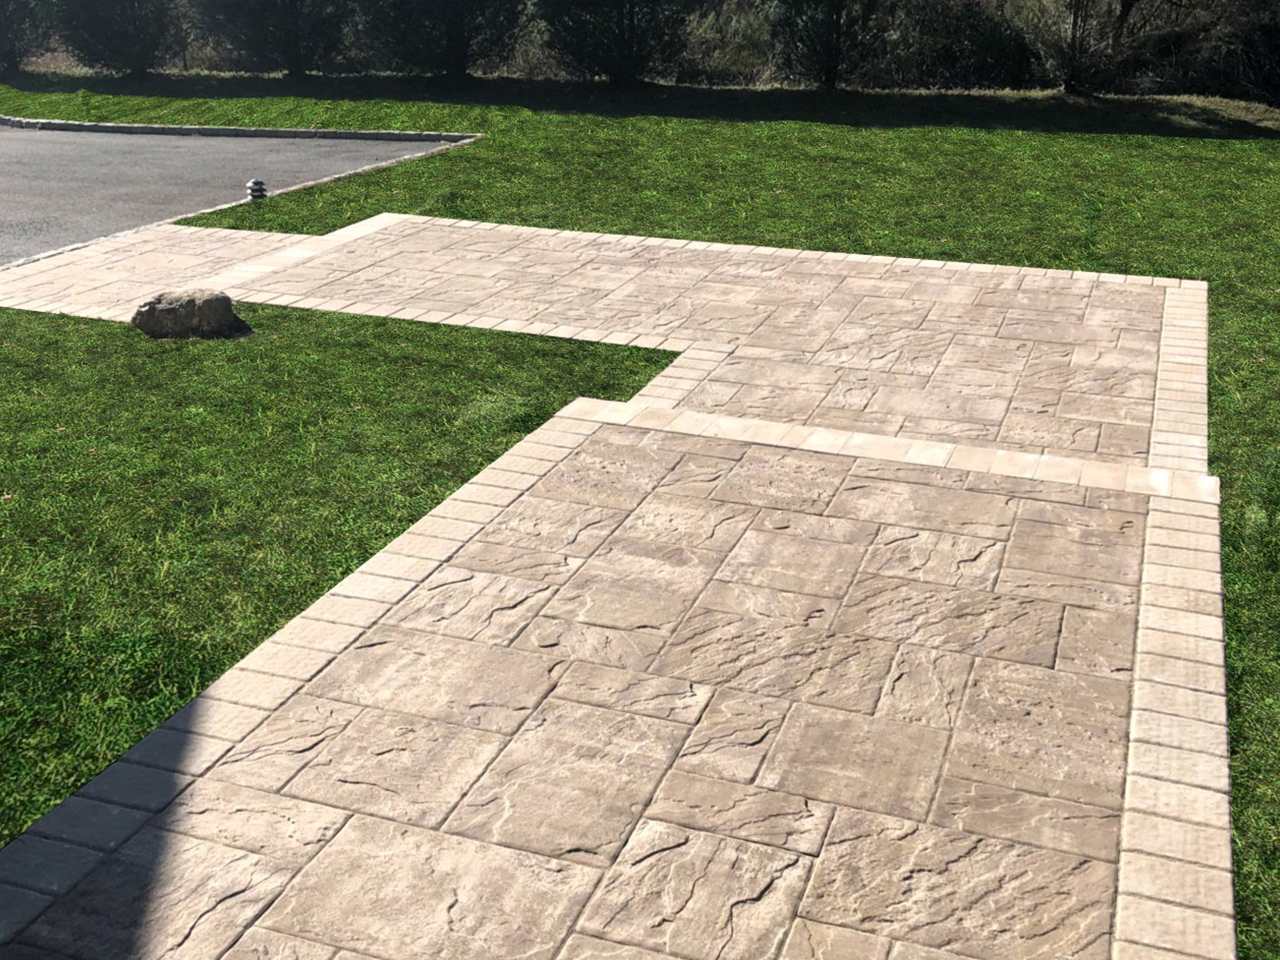 paver walkway installation. A picture-perfect patio walkway by Affordable Patio, demonstrating their expertise in creating functional and visually appealing outdoor spaces